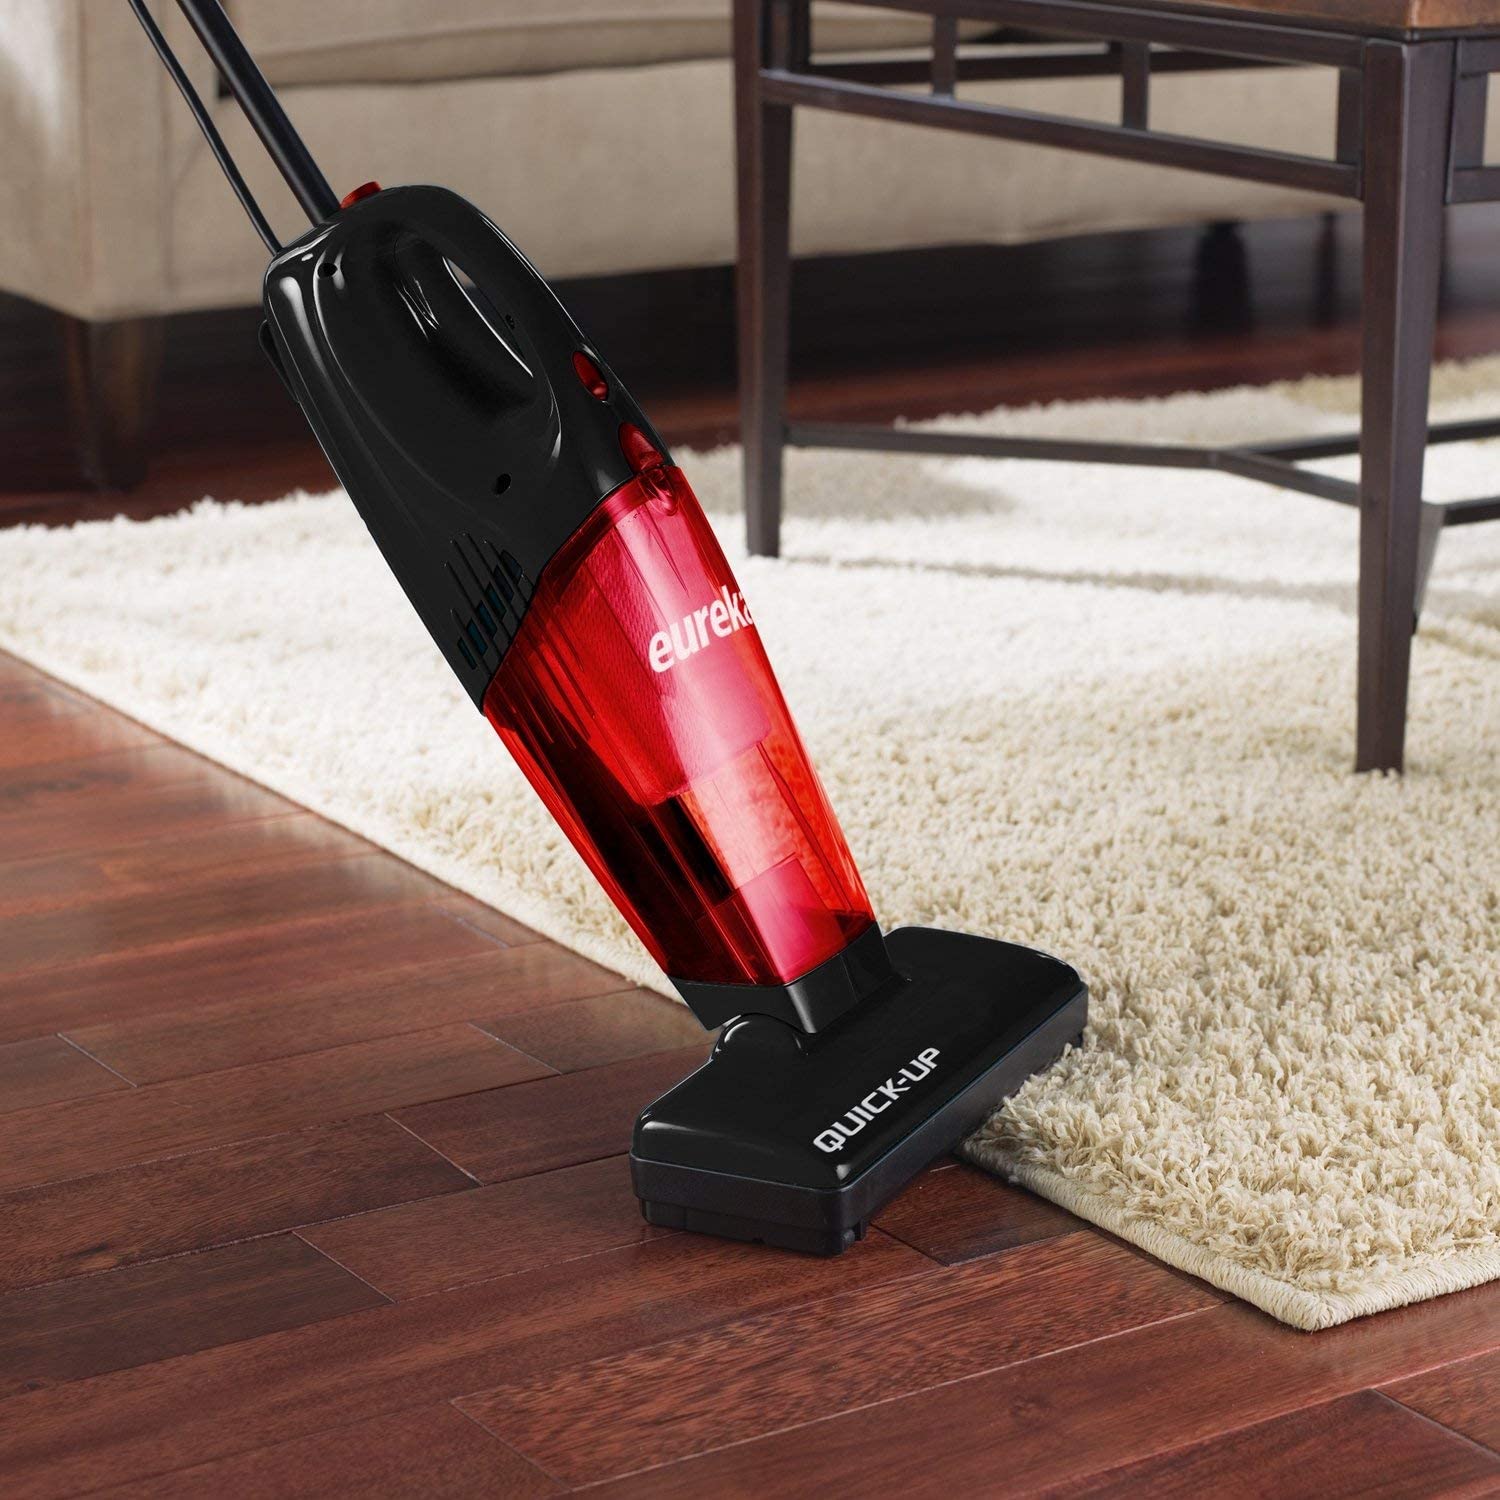 Eureka 169K 2-in-1 Quick-Up Bagless Stick Vacuum Cleaner for Bare Floors and Rugs, Light Red - image 4 of 5